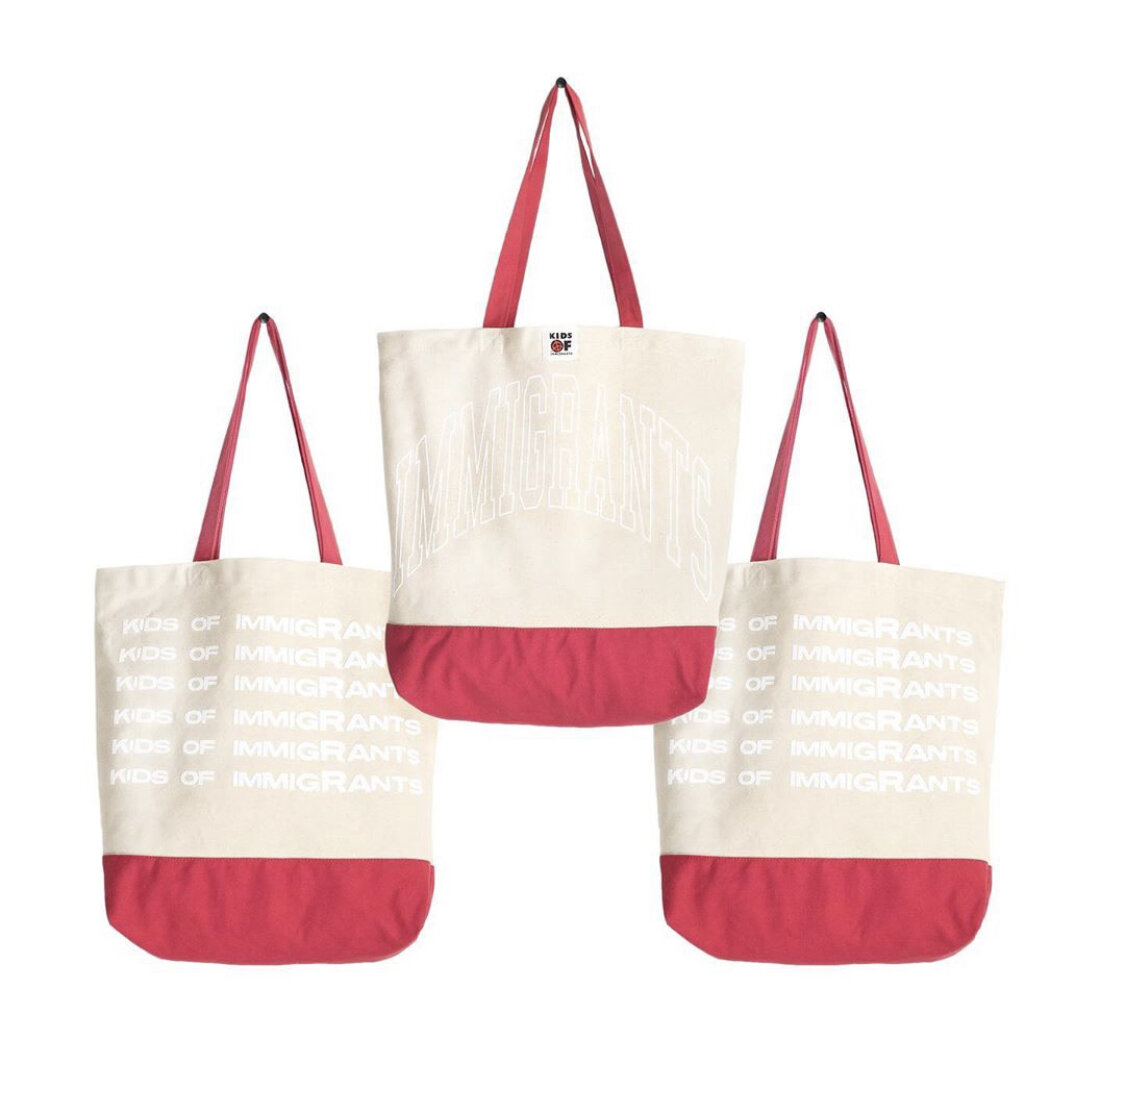 CNK-Kids-Of-Immigrants-Work-a-Day-in-Our-Shoes-Tan-and-Red-Tote-Bag.jpg